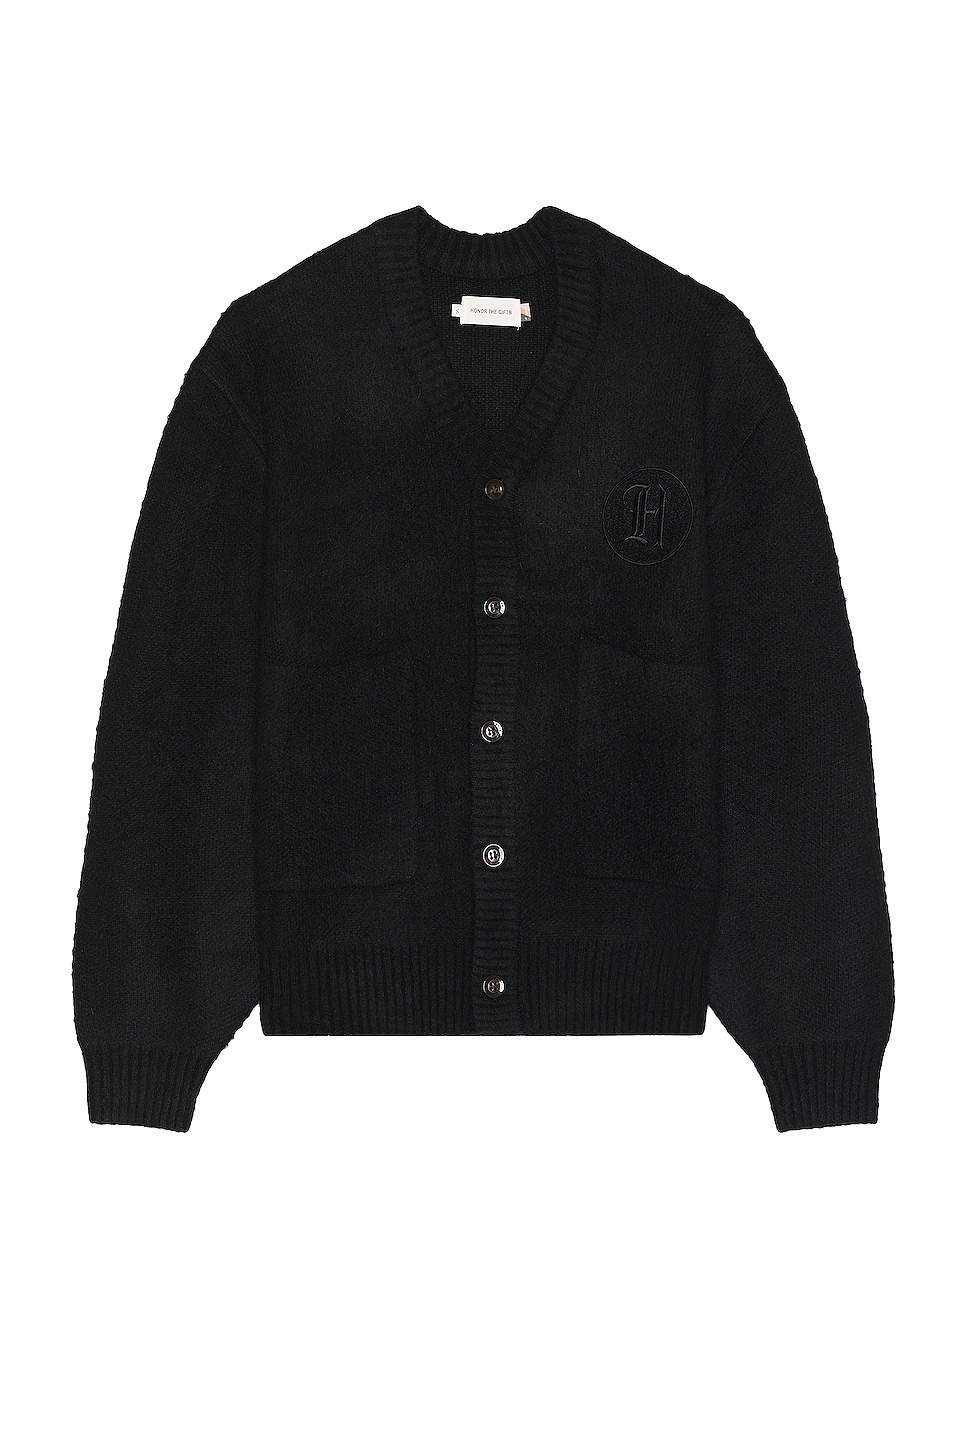 Stamped Patch Cardigan in Black